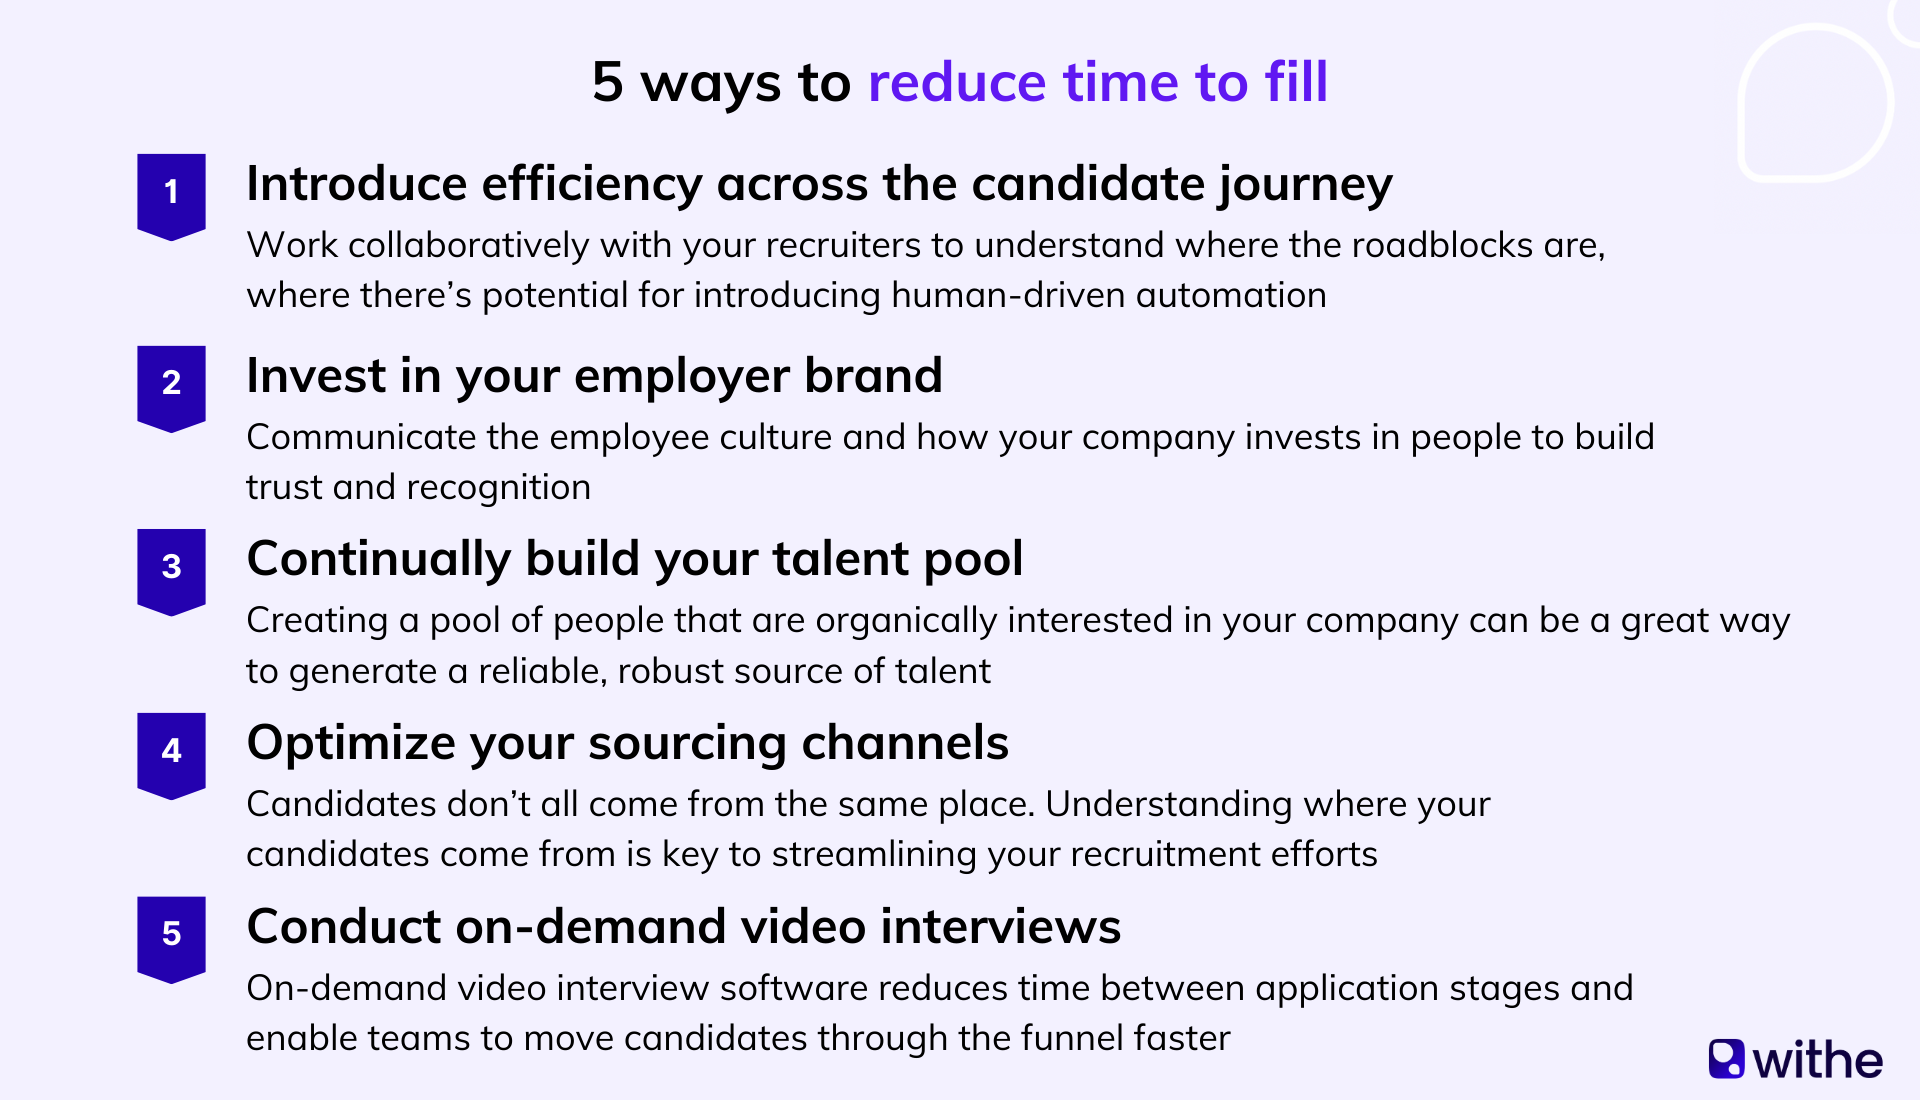 4 ways to reduce time to fill